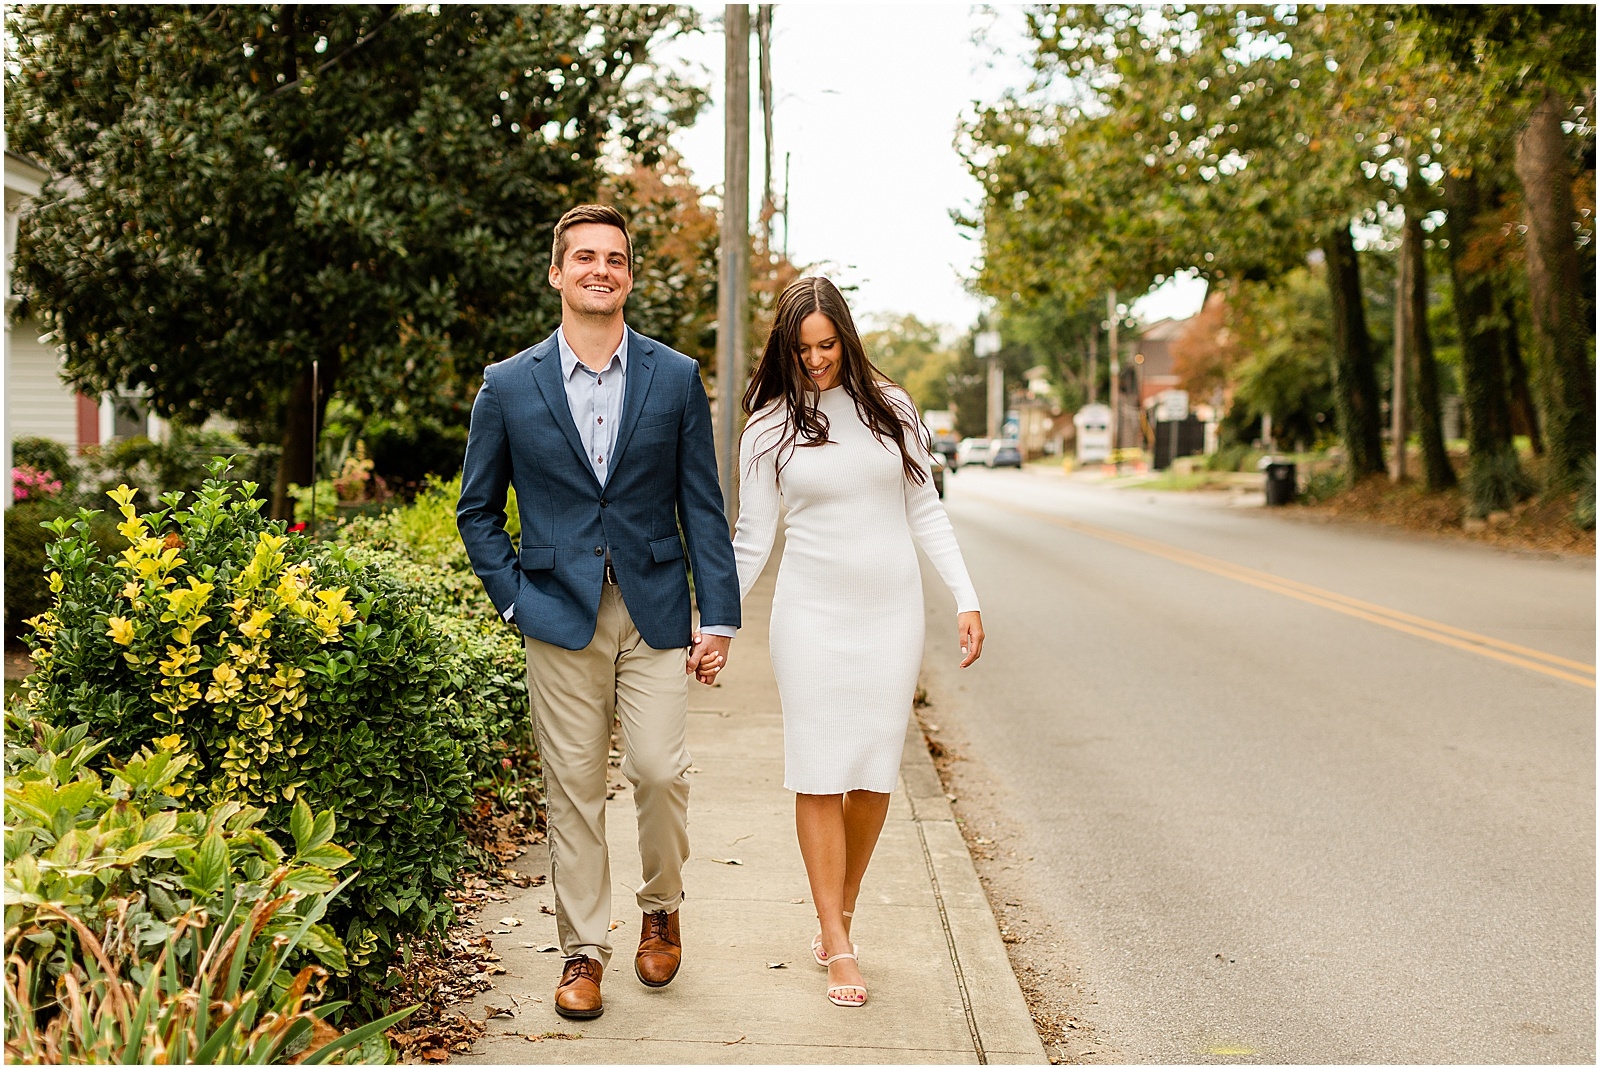 Emma and Jace's Downtown Newburgh Engagement Session | Bret and Brandie Photography | Evansville Indiana Wedding Photographers_0017.jpg